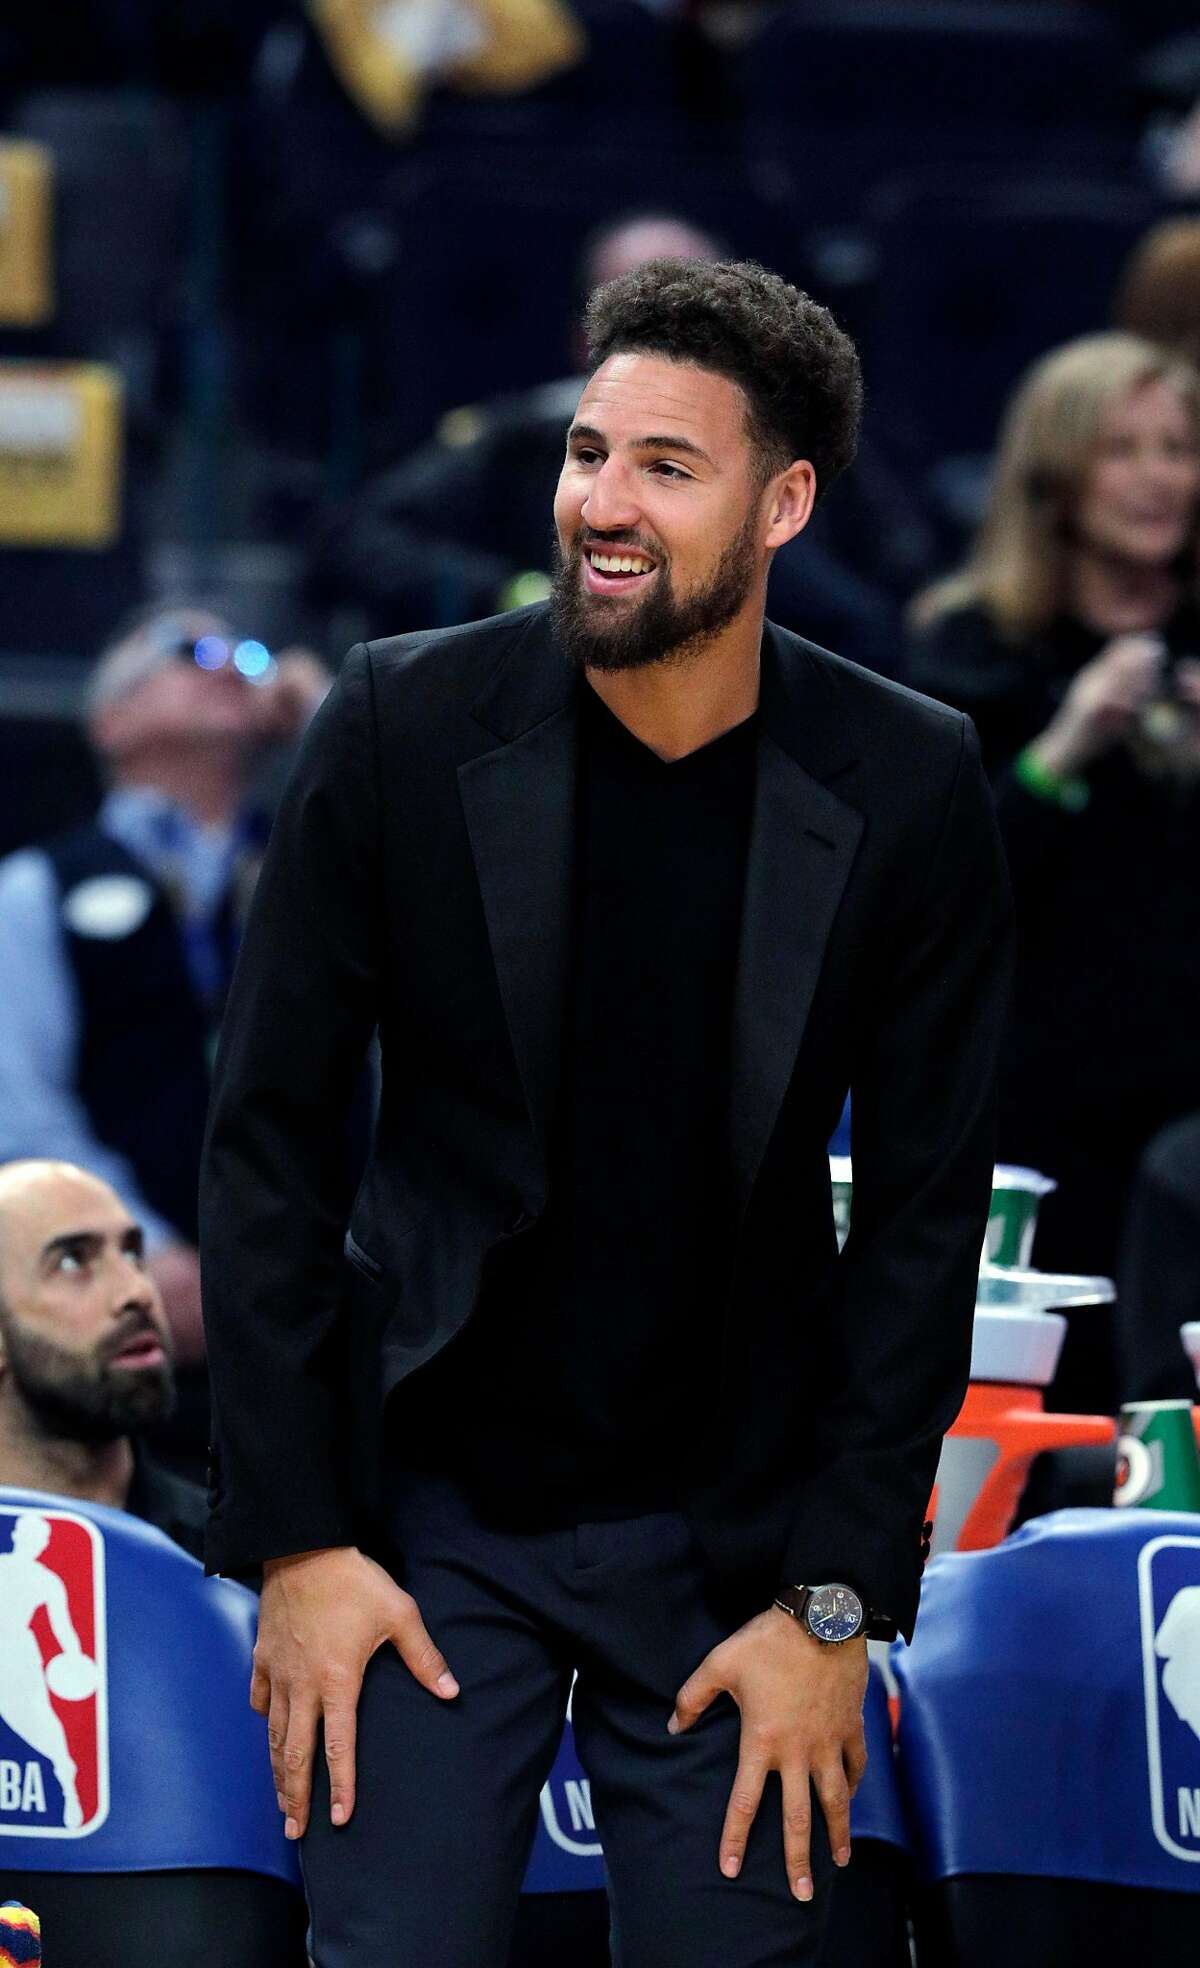 Klay Thompson (11) smiles toward fans In the first half as the Golden State Warriors played the Houston Rockets at Chase Center in San Francisco, Calif., on Thursday, February 20, 2020.